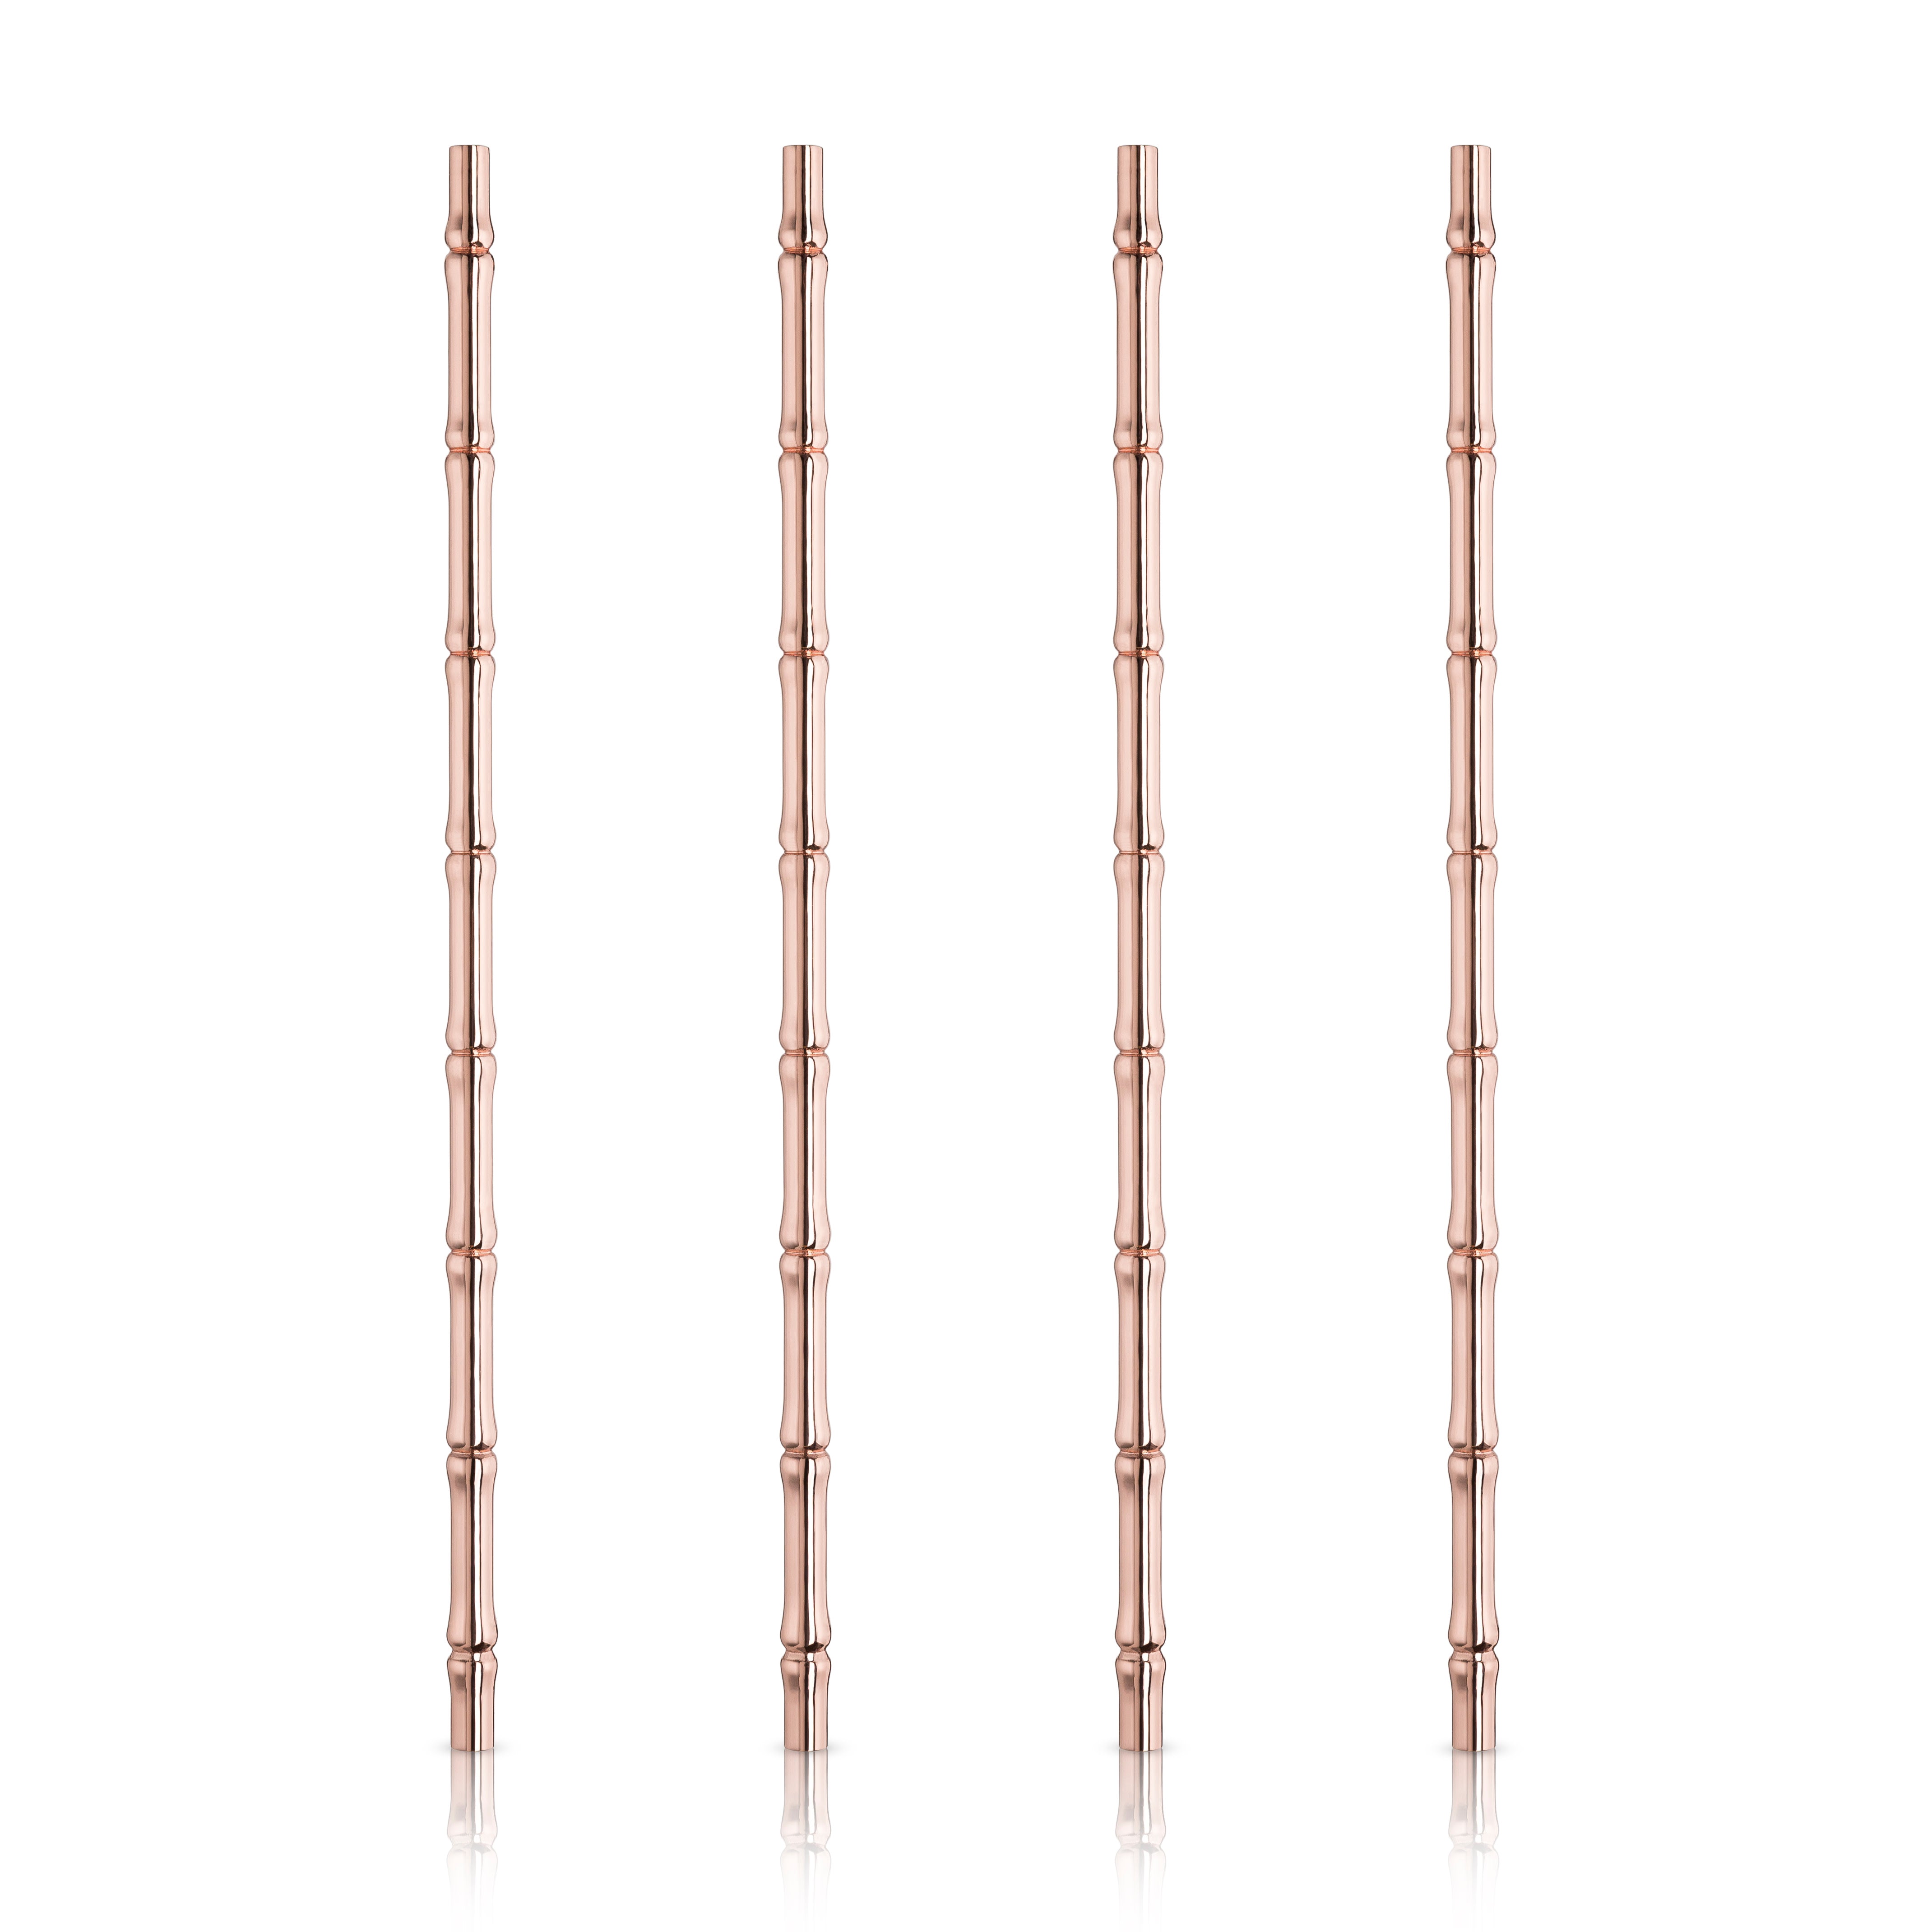 Large Rose Gold / Copper Steel Straw / Straws Set With Bag & 